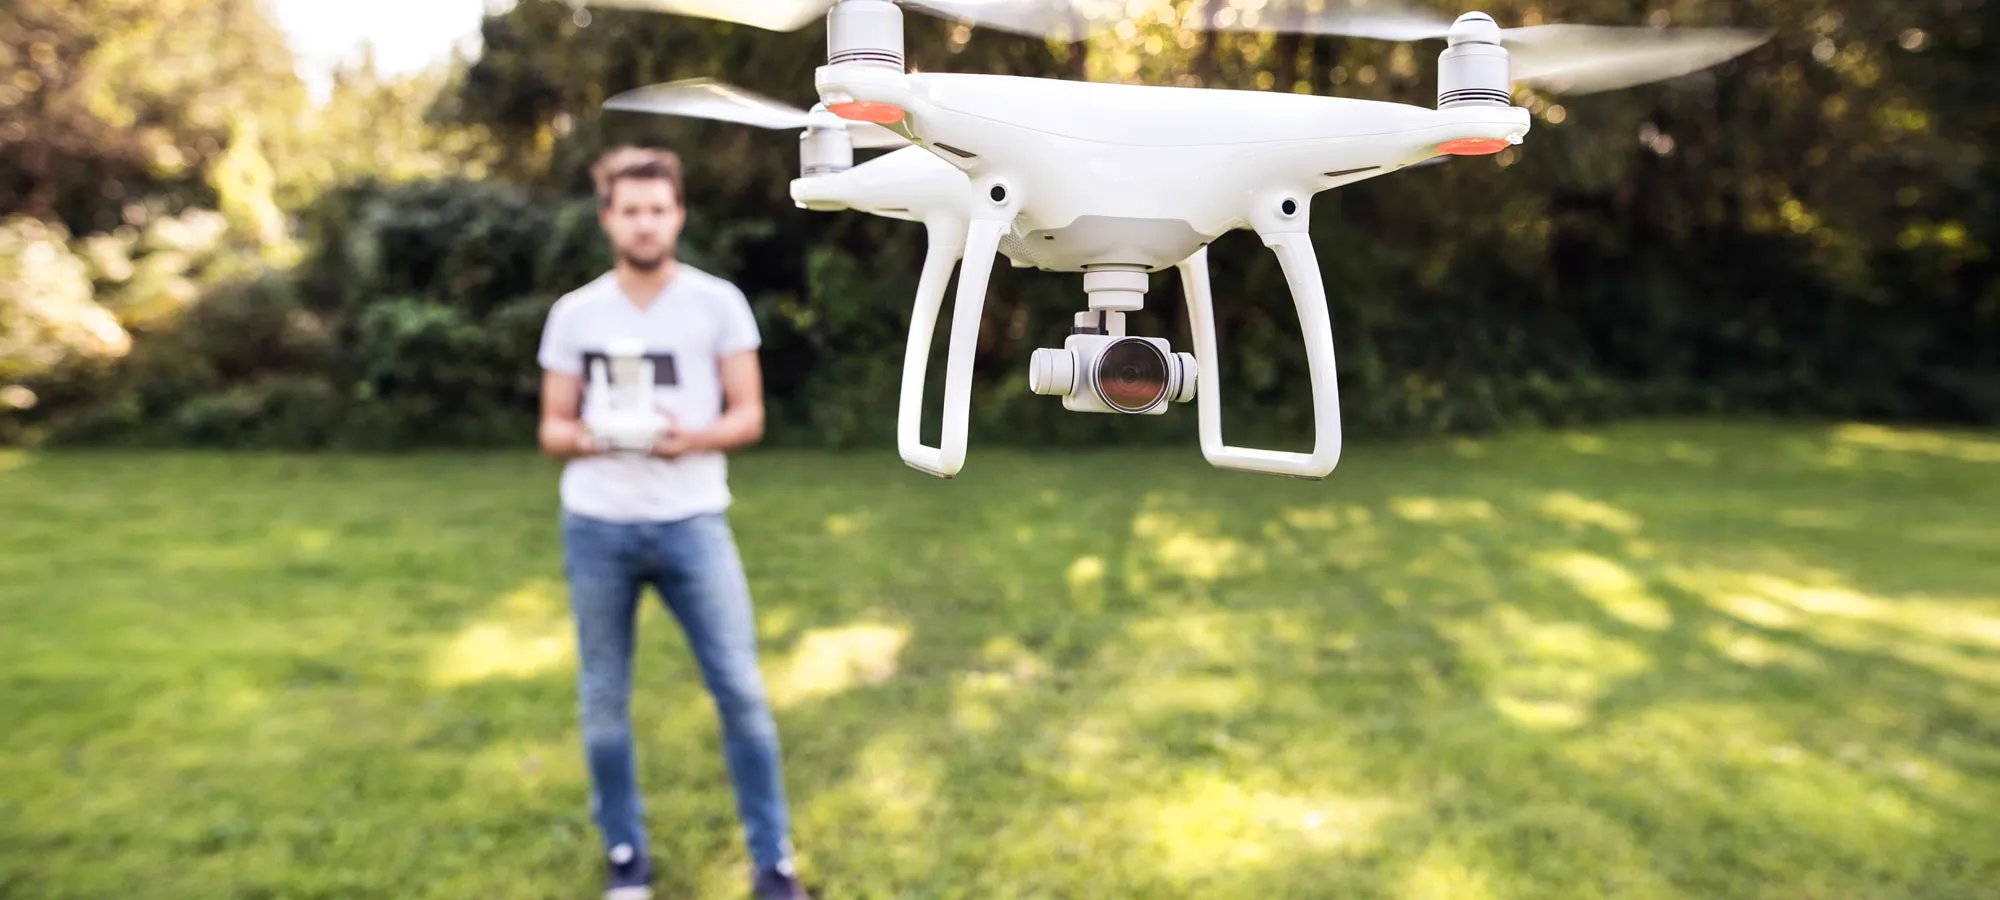 How To Fly A Drone?